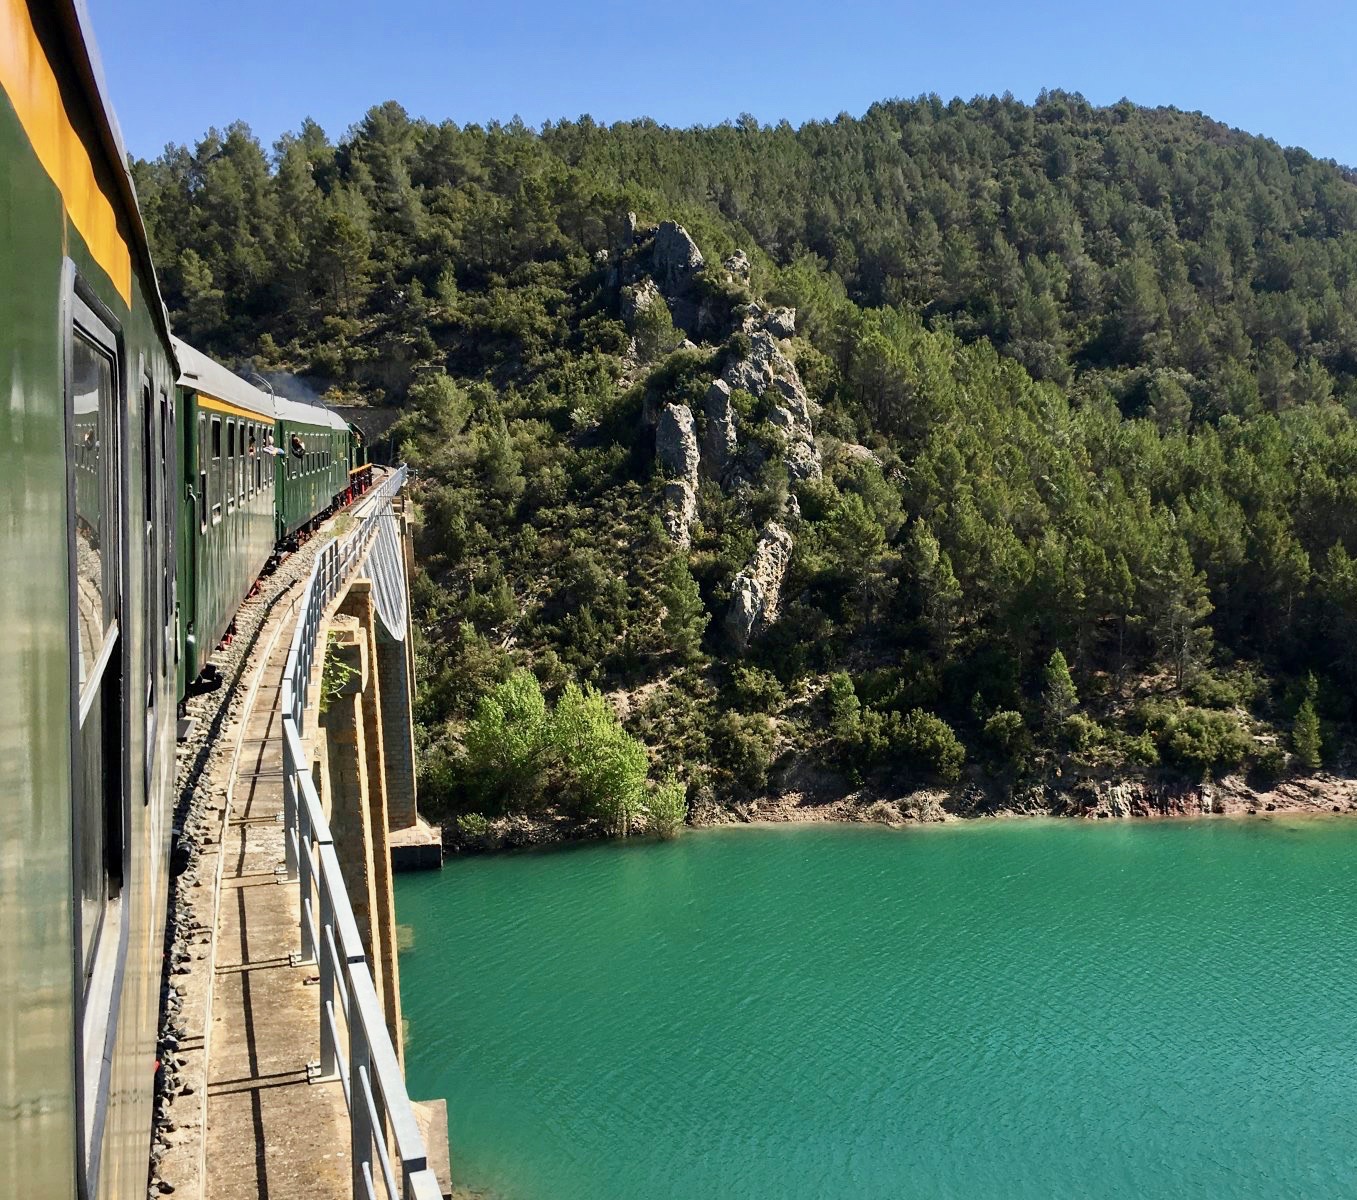 View of the train passing over a bridge crossing a lake